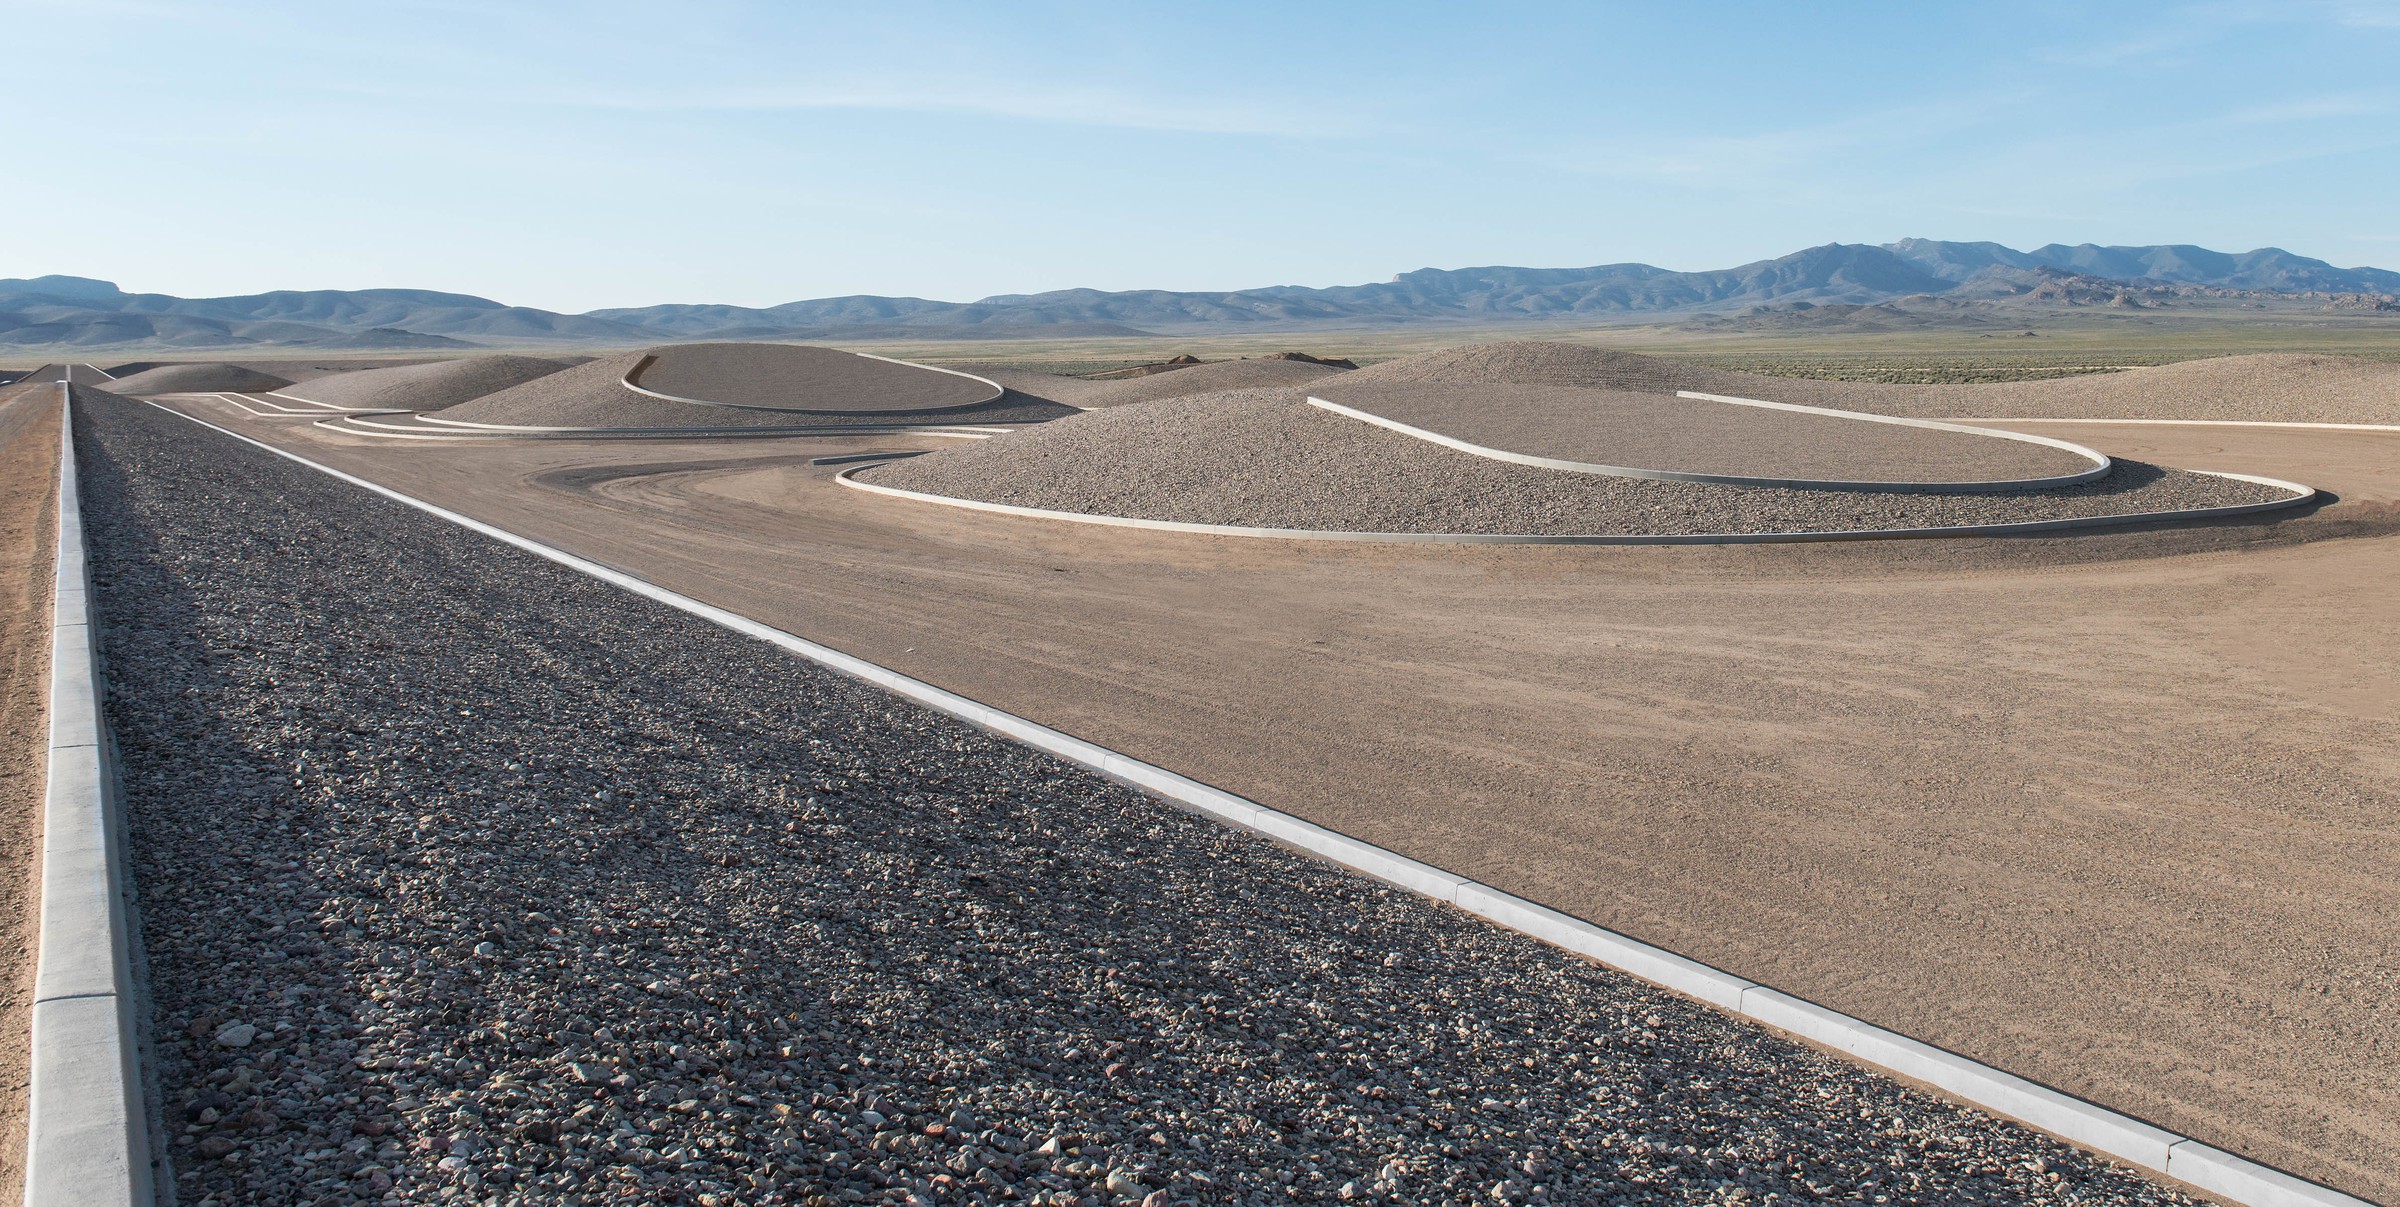 Take a look at photos of Michael Heizer's 'City' ahead of its debut, News